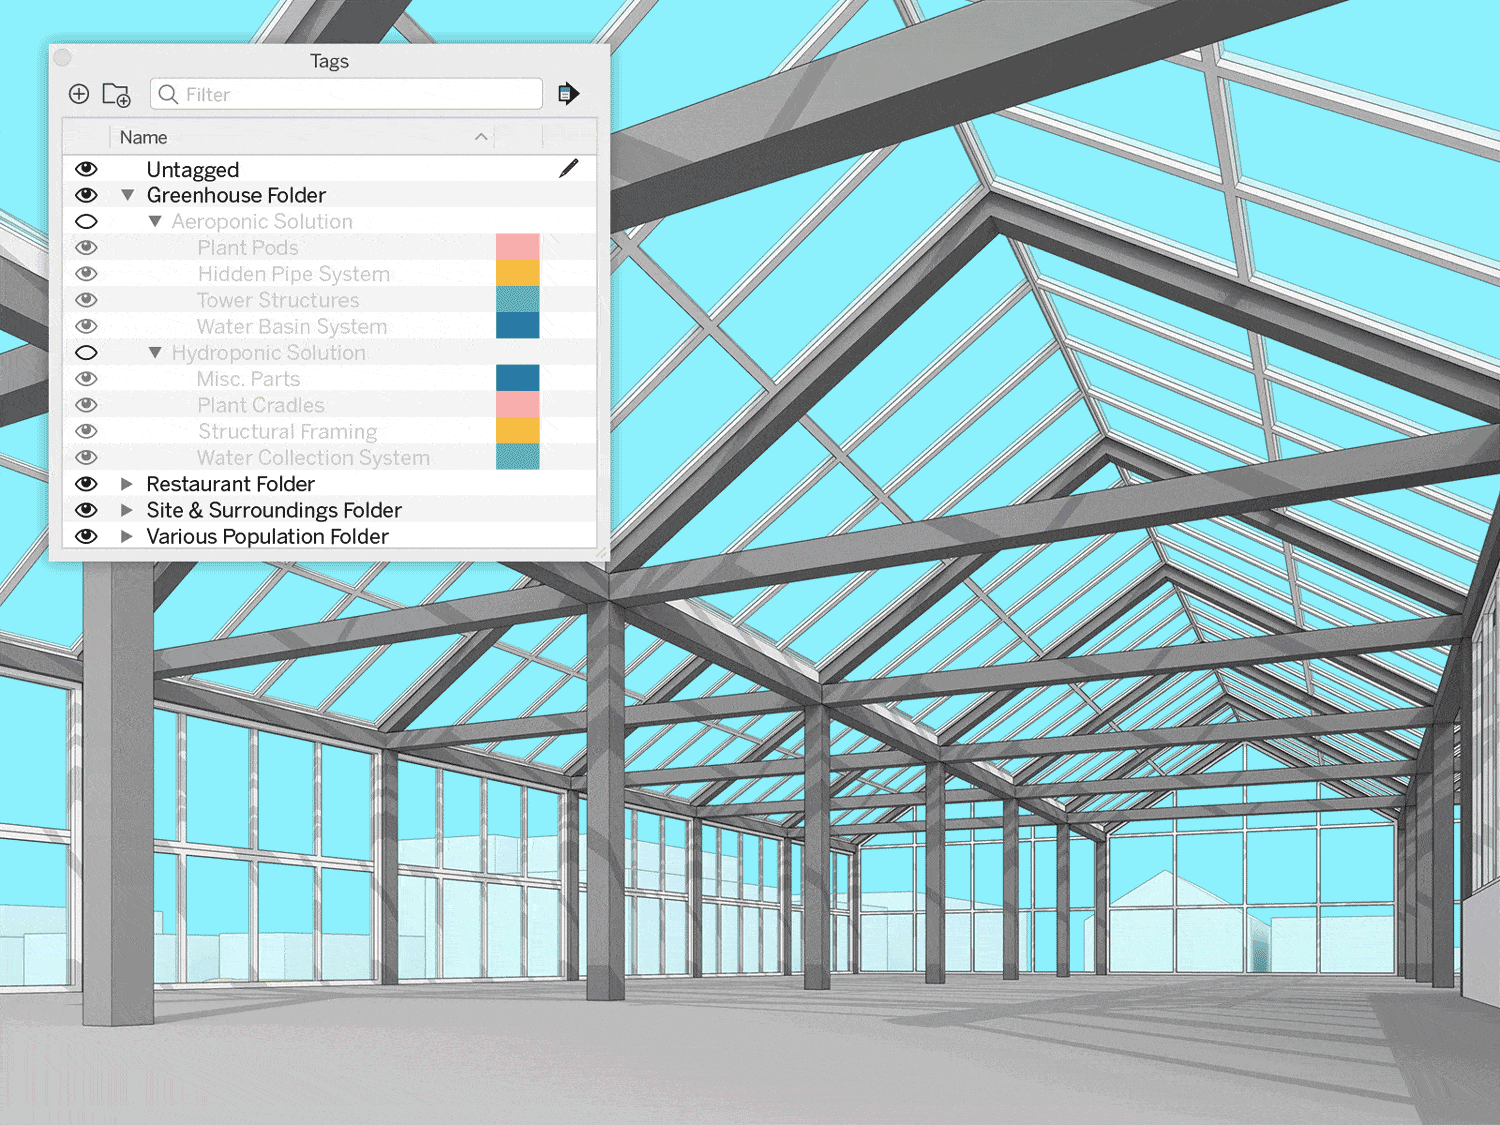 SketchUp Software - SketchUp's organization tools help keep your complex projects clean. With Tags, you can access components of your model quickly and control visibility in bulk.